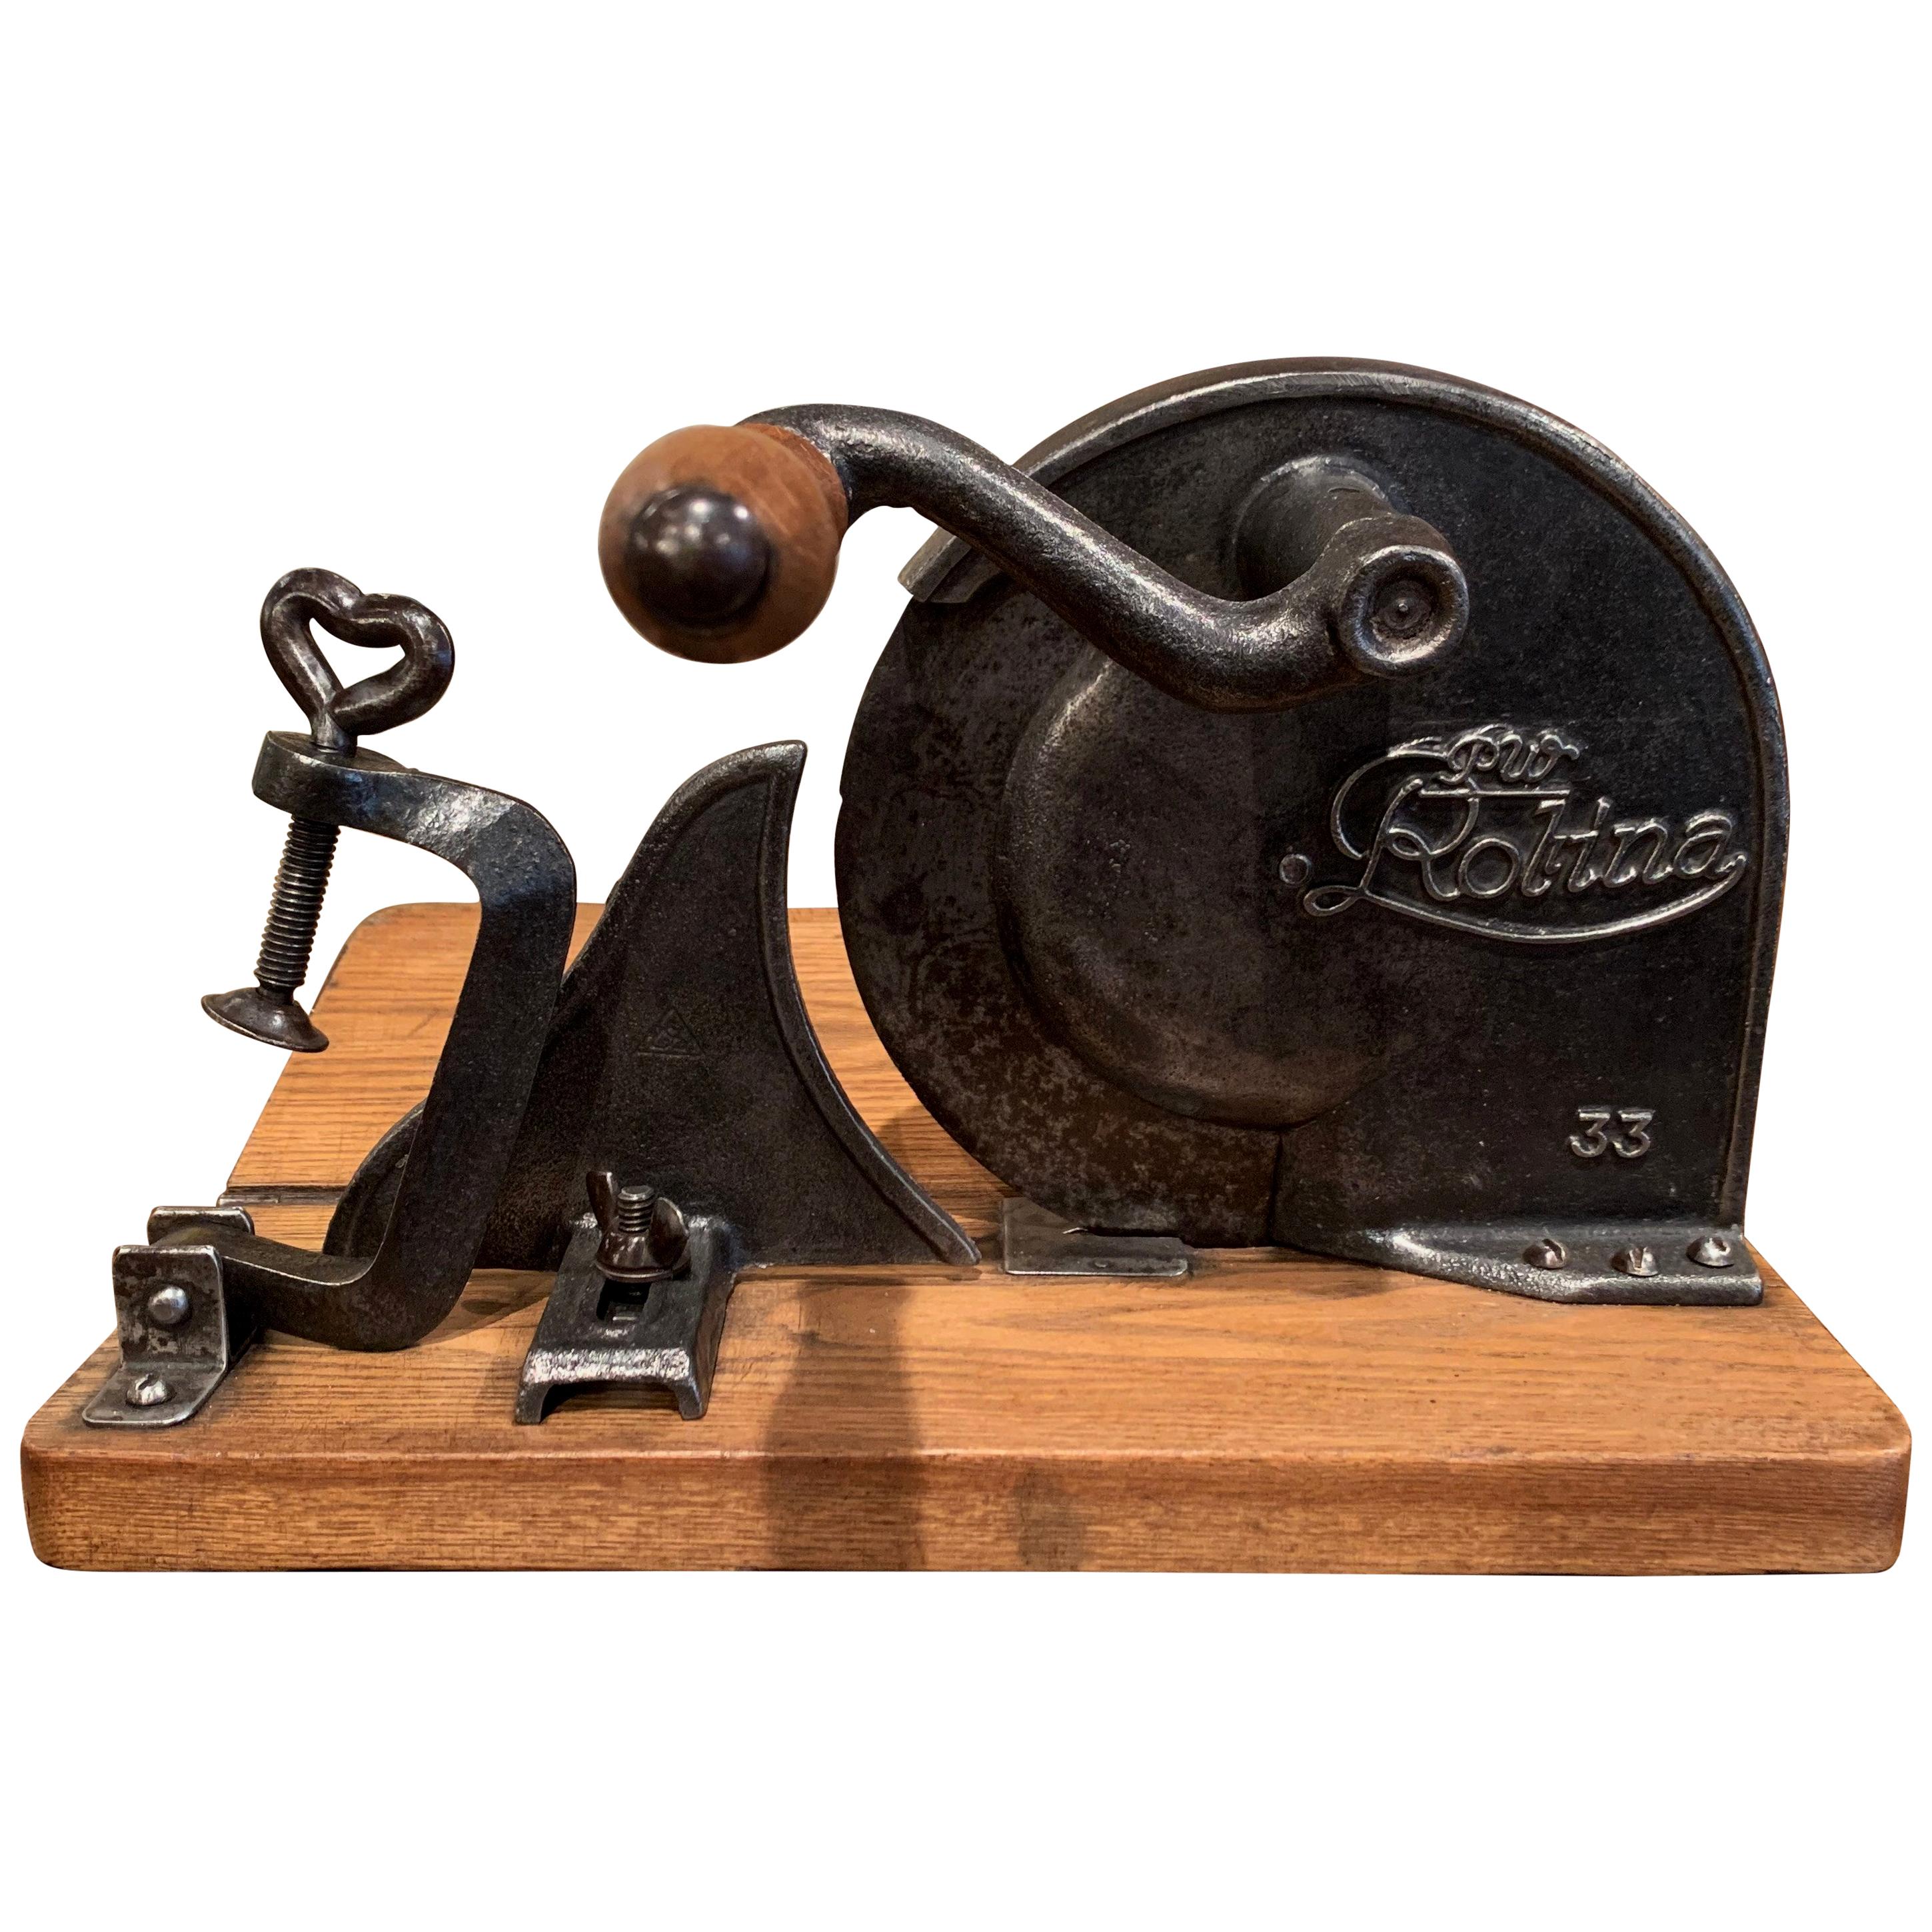 https://a.1stdibscdn.com/early-20th-century-german-iron-and-wood-adjustable-meat-and-bread-slicer-for-sale/1121189/f_182095411584087909763/18209541_master.jpg